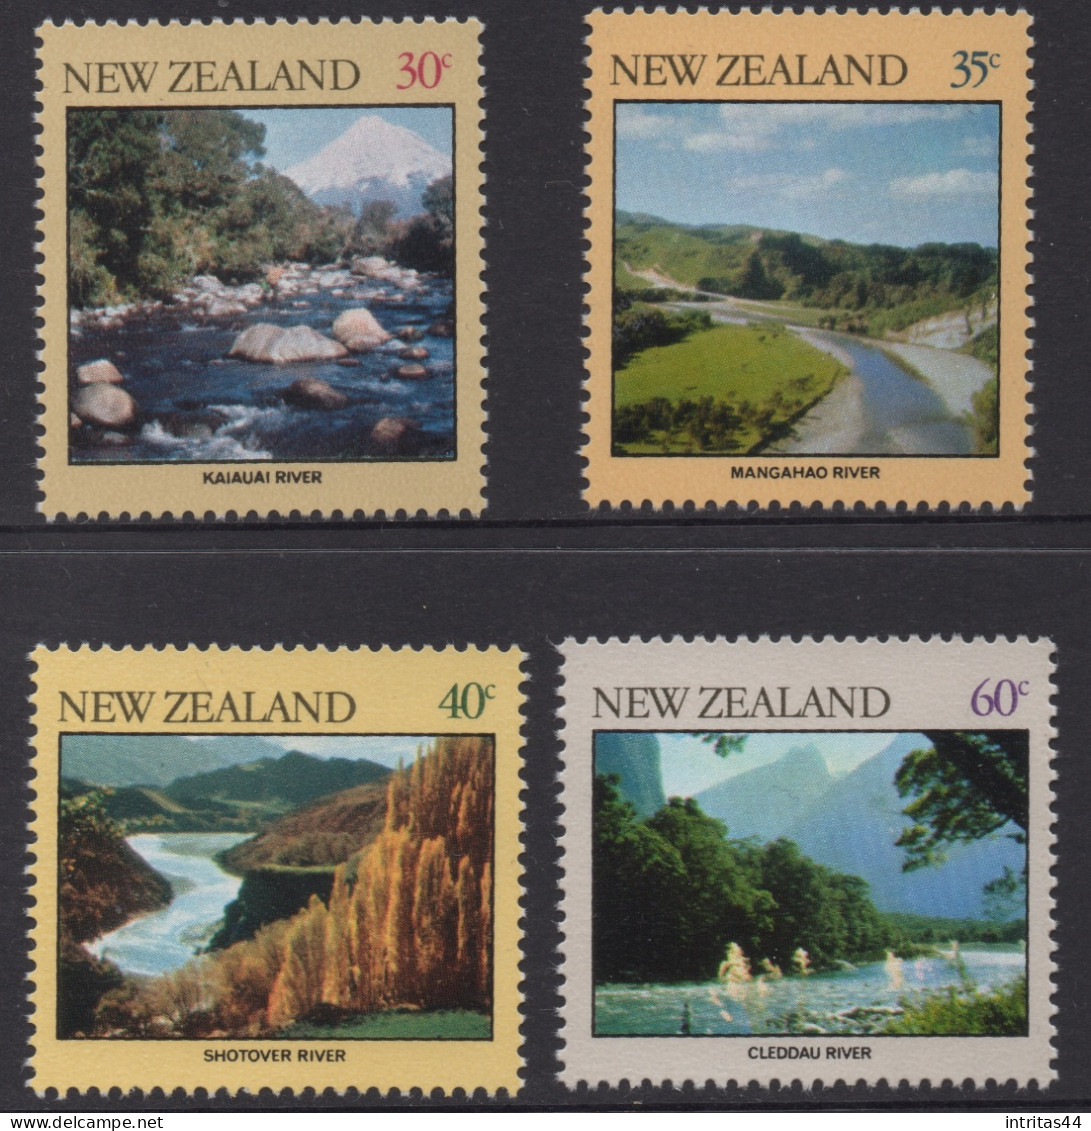 NEW ZEALAND 1981 " RIVERS " SET MNH - Unused Stamps